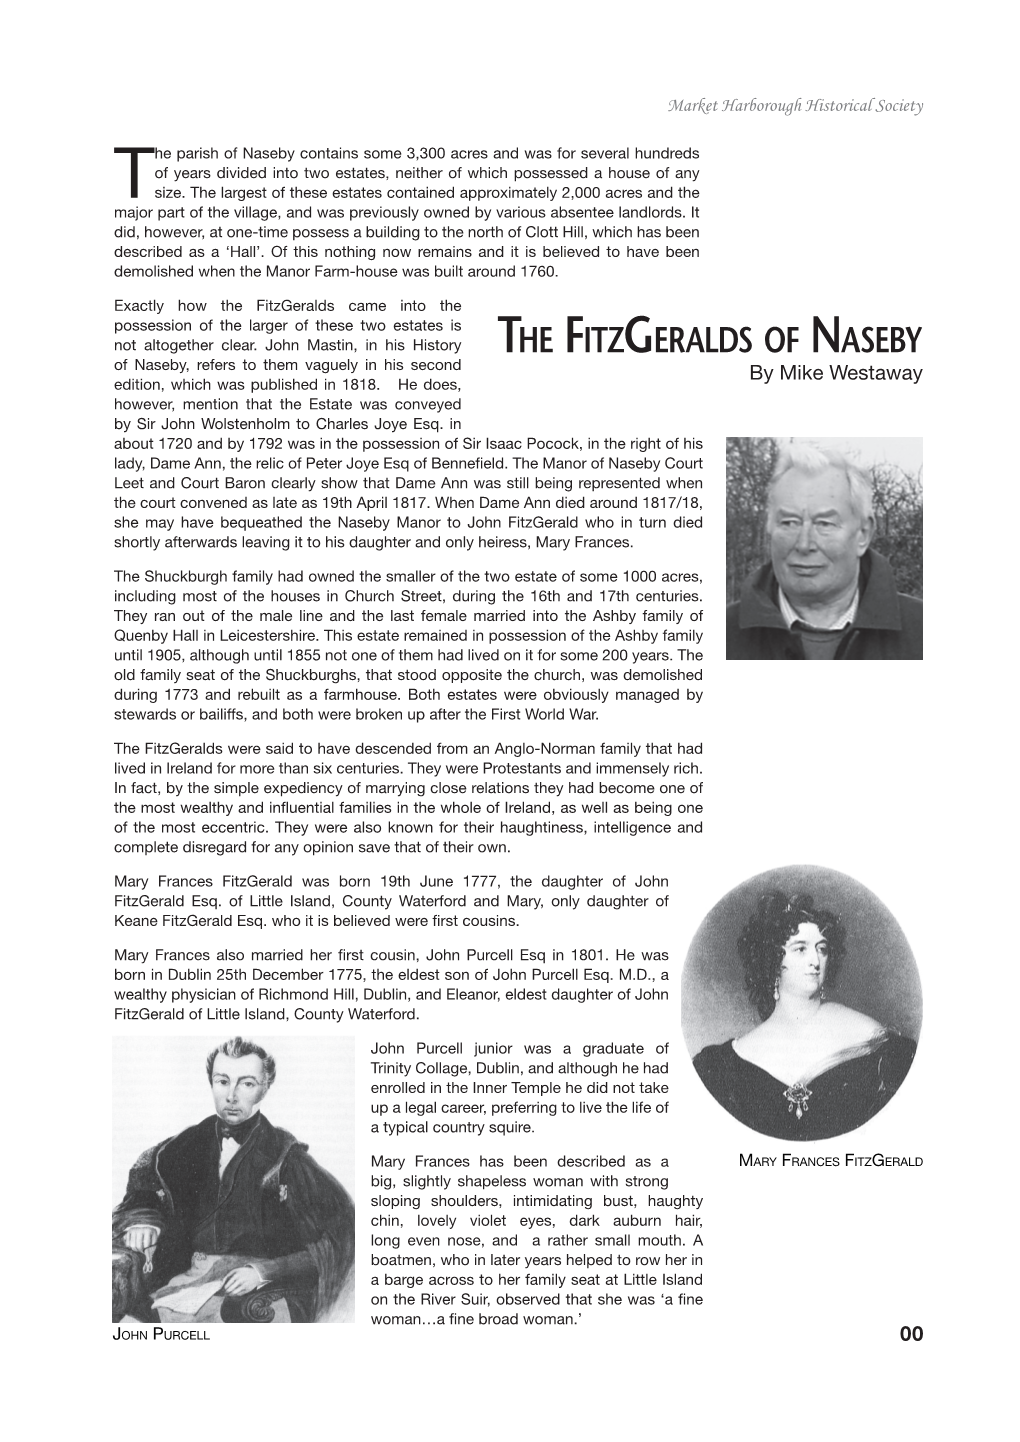 The Fitzgeralds of Naseby